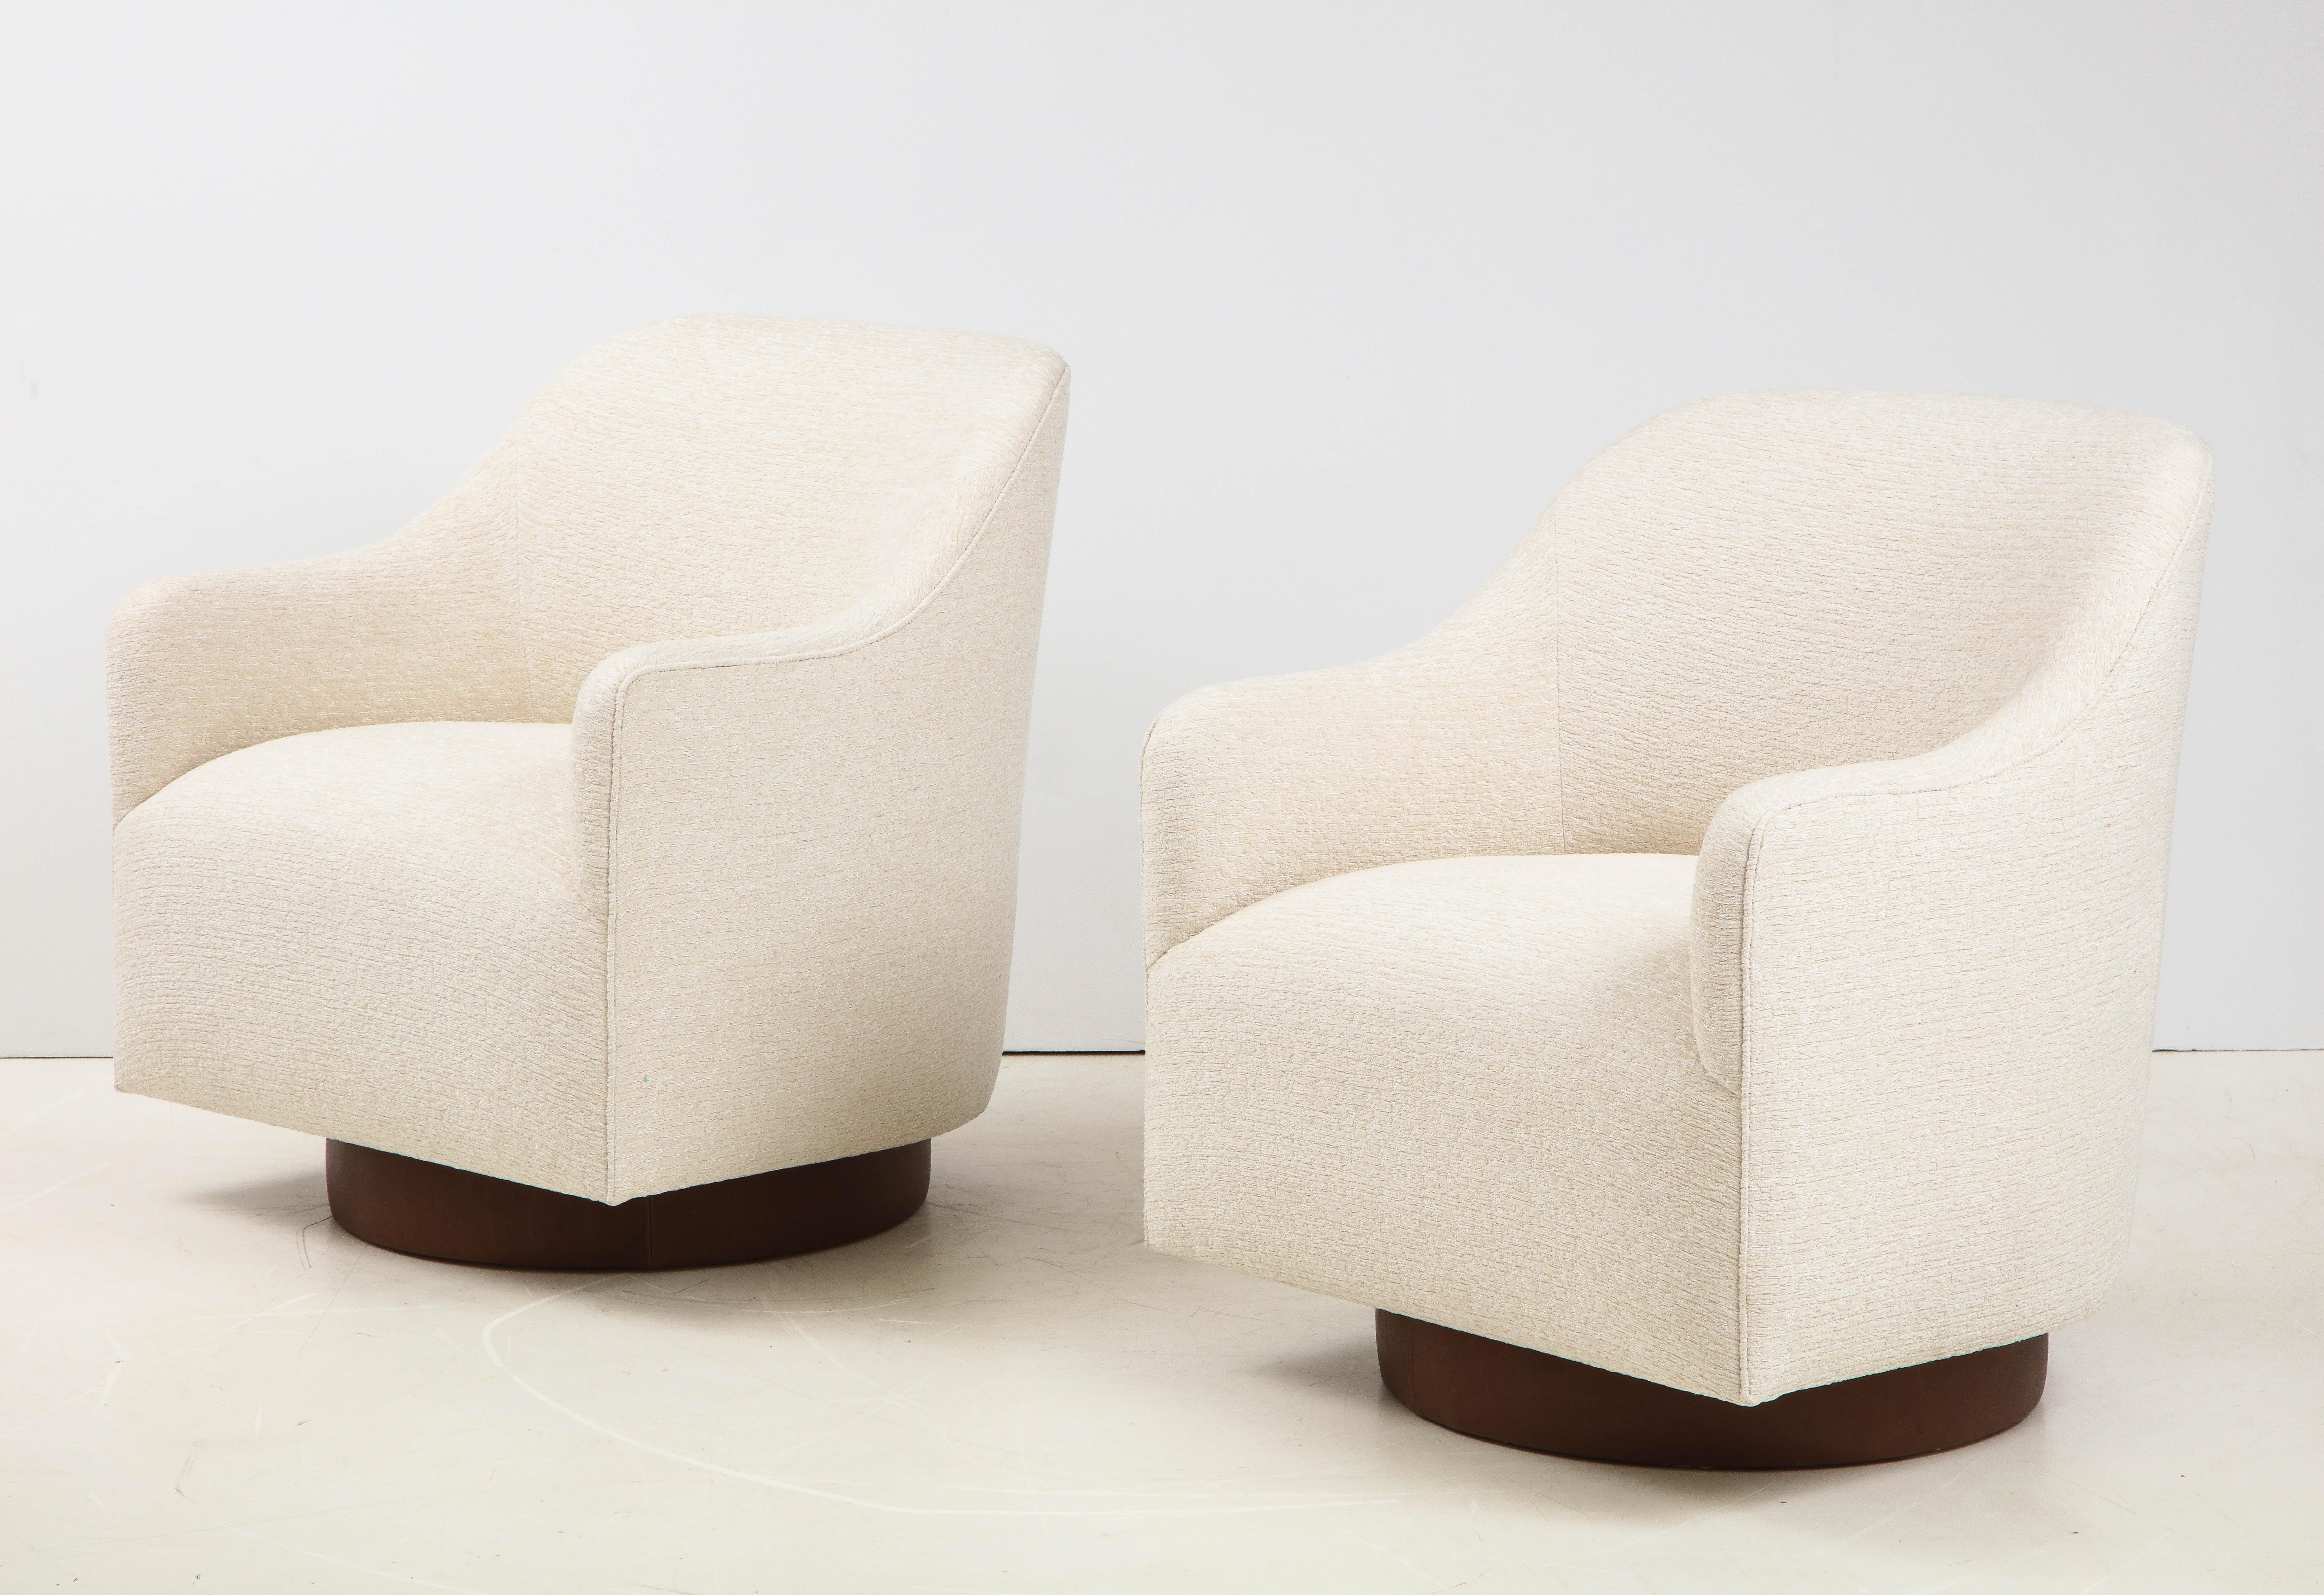 Pair of tilt/swivel club chairs by Milo Baughman for Directional featuring new ivory boucle upholstery and brown leather wrapped base. Chairs are generous in size and have a streamlined sleek profile. New padding, foam.